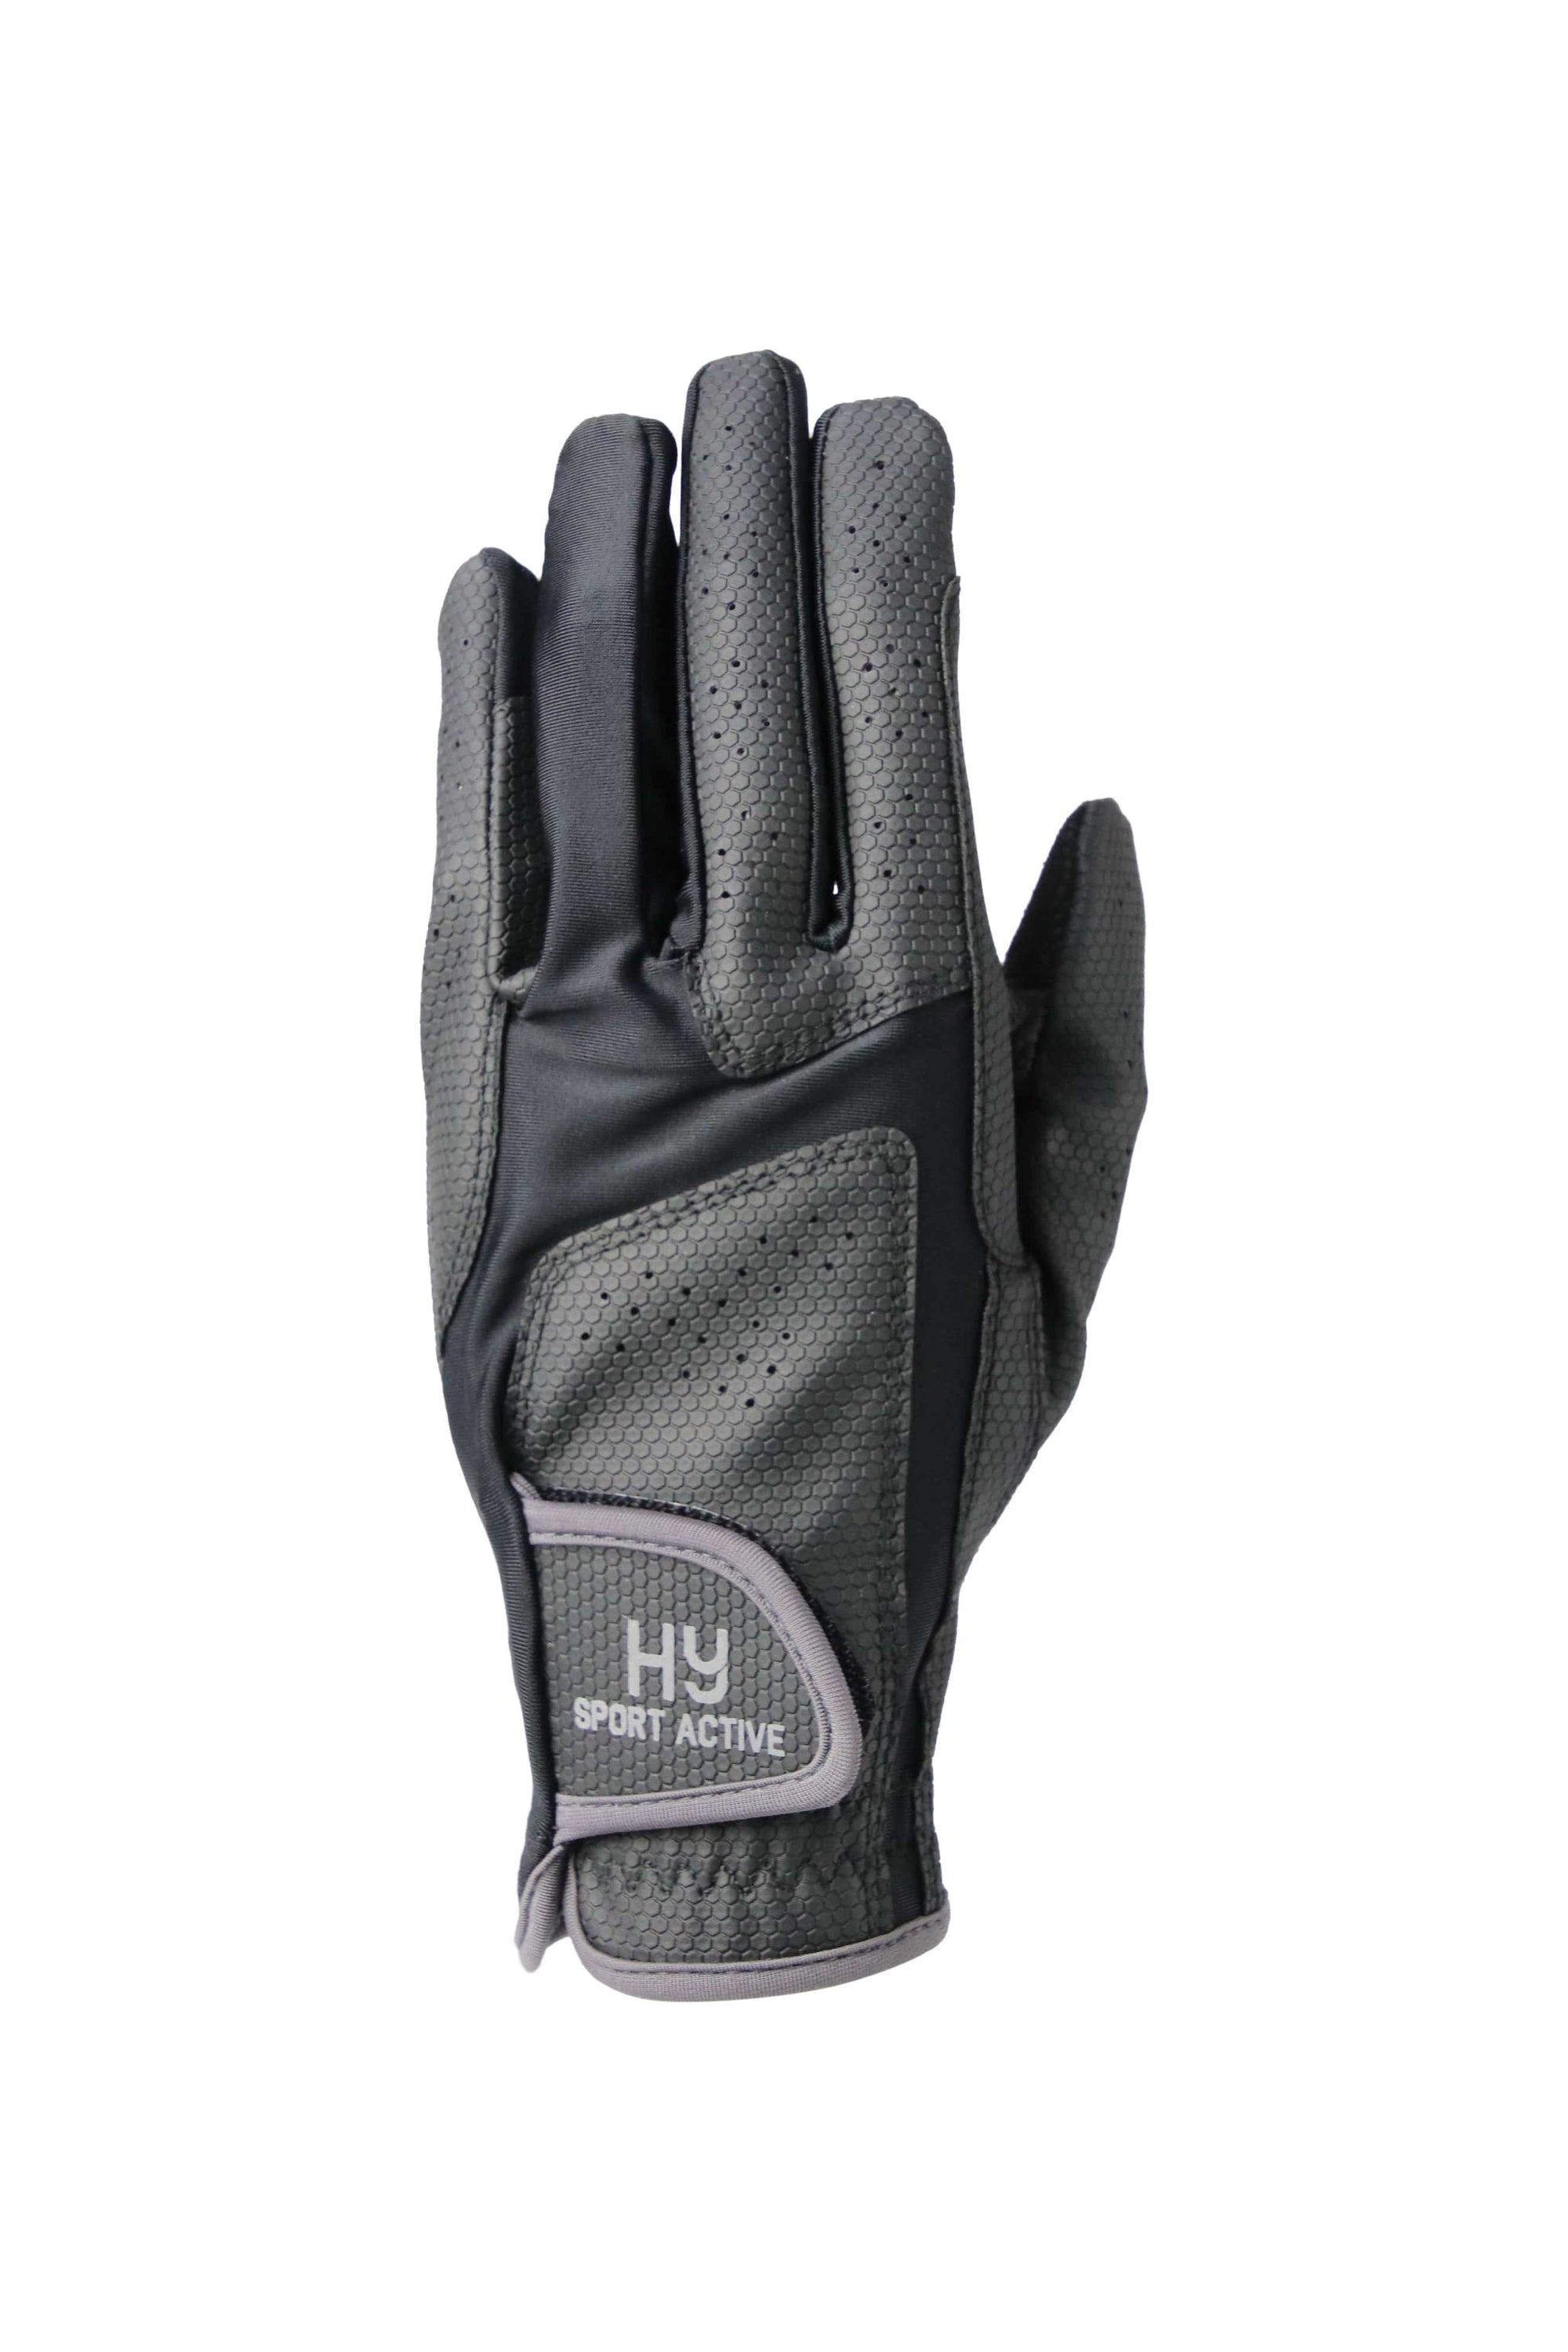 Hy sport active riding gloves